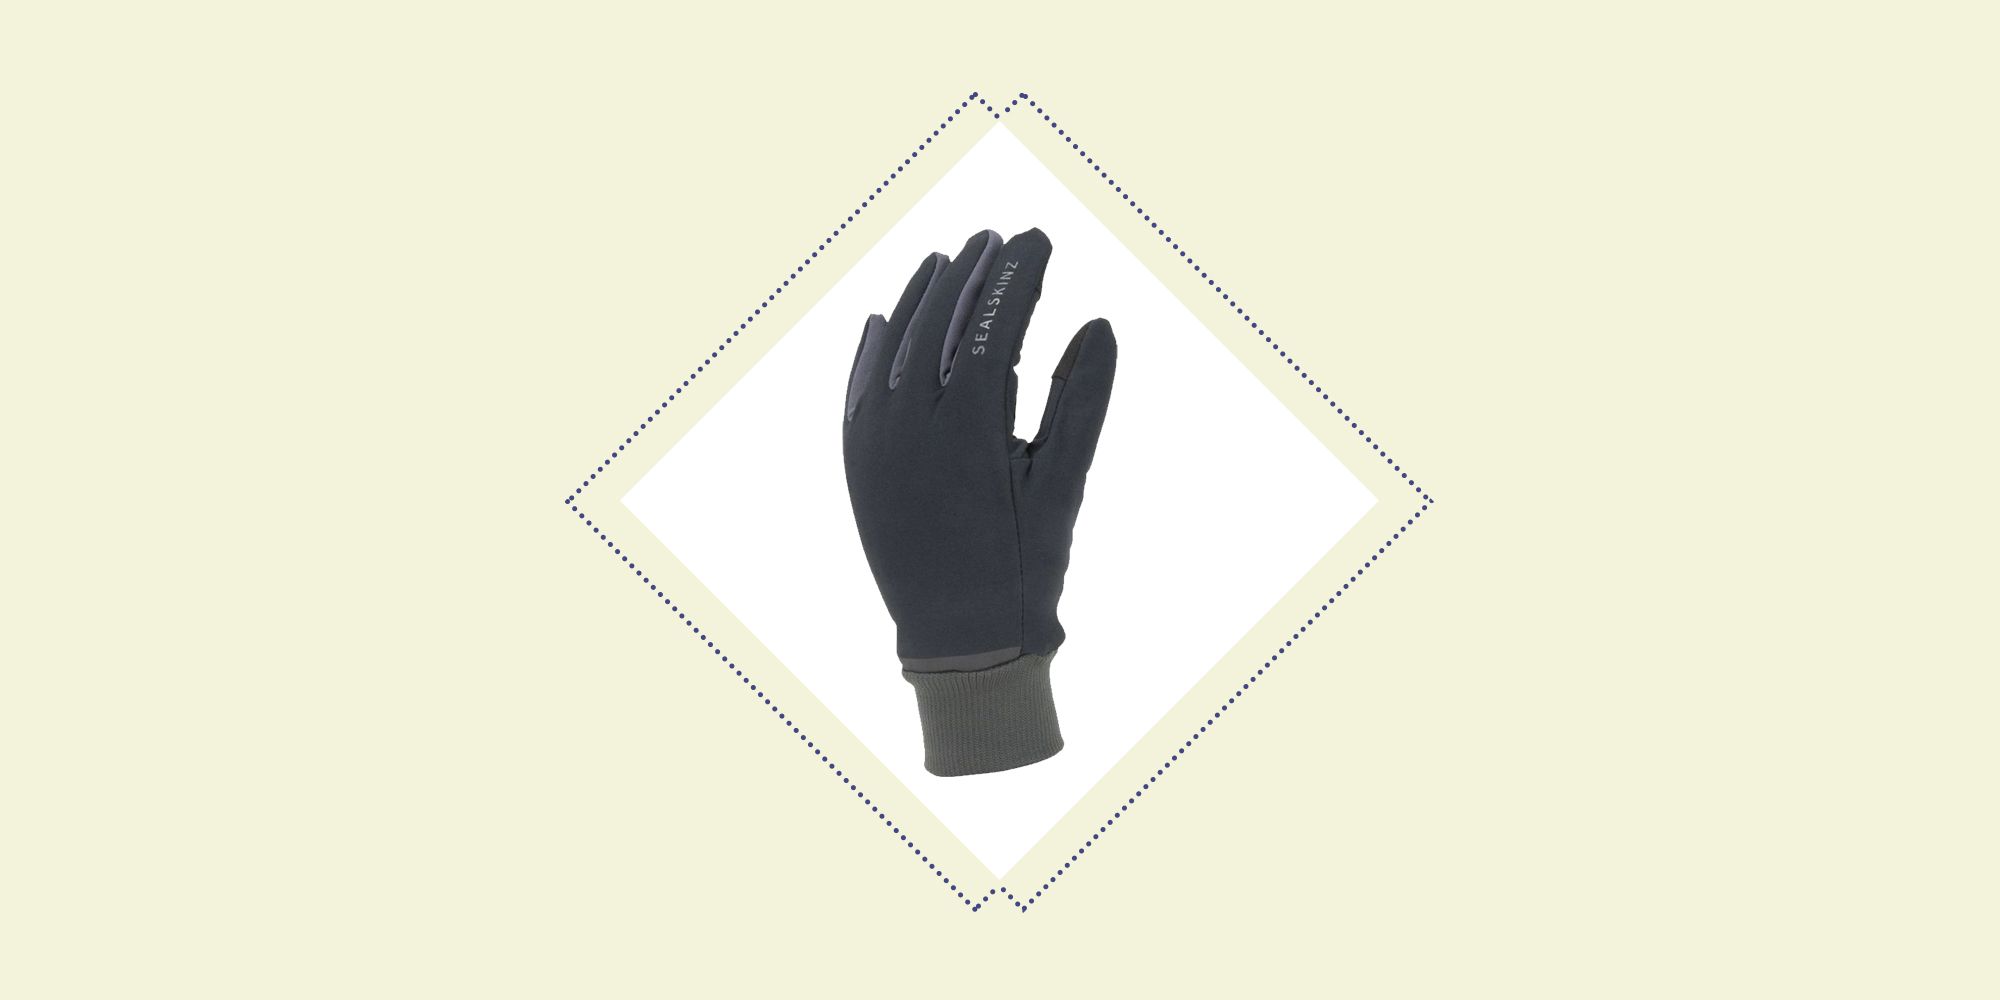 B-FOREST Winter Gloves for Men Women Touchscreen Thermal Gloves Water Resistant & Windproof in Cold Weather 